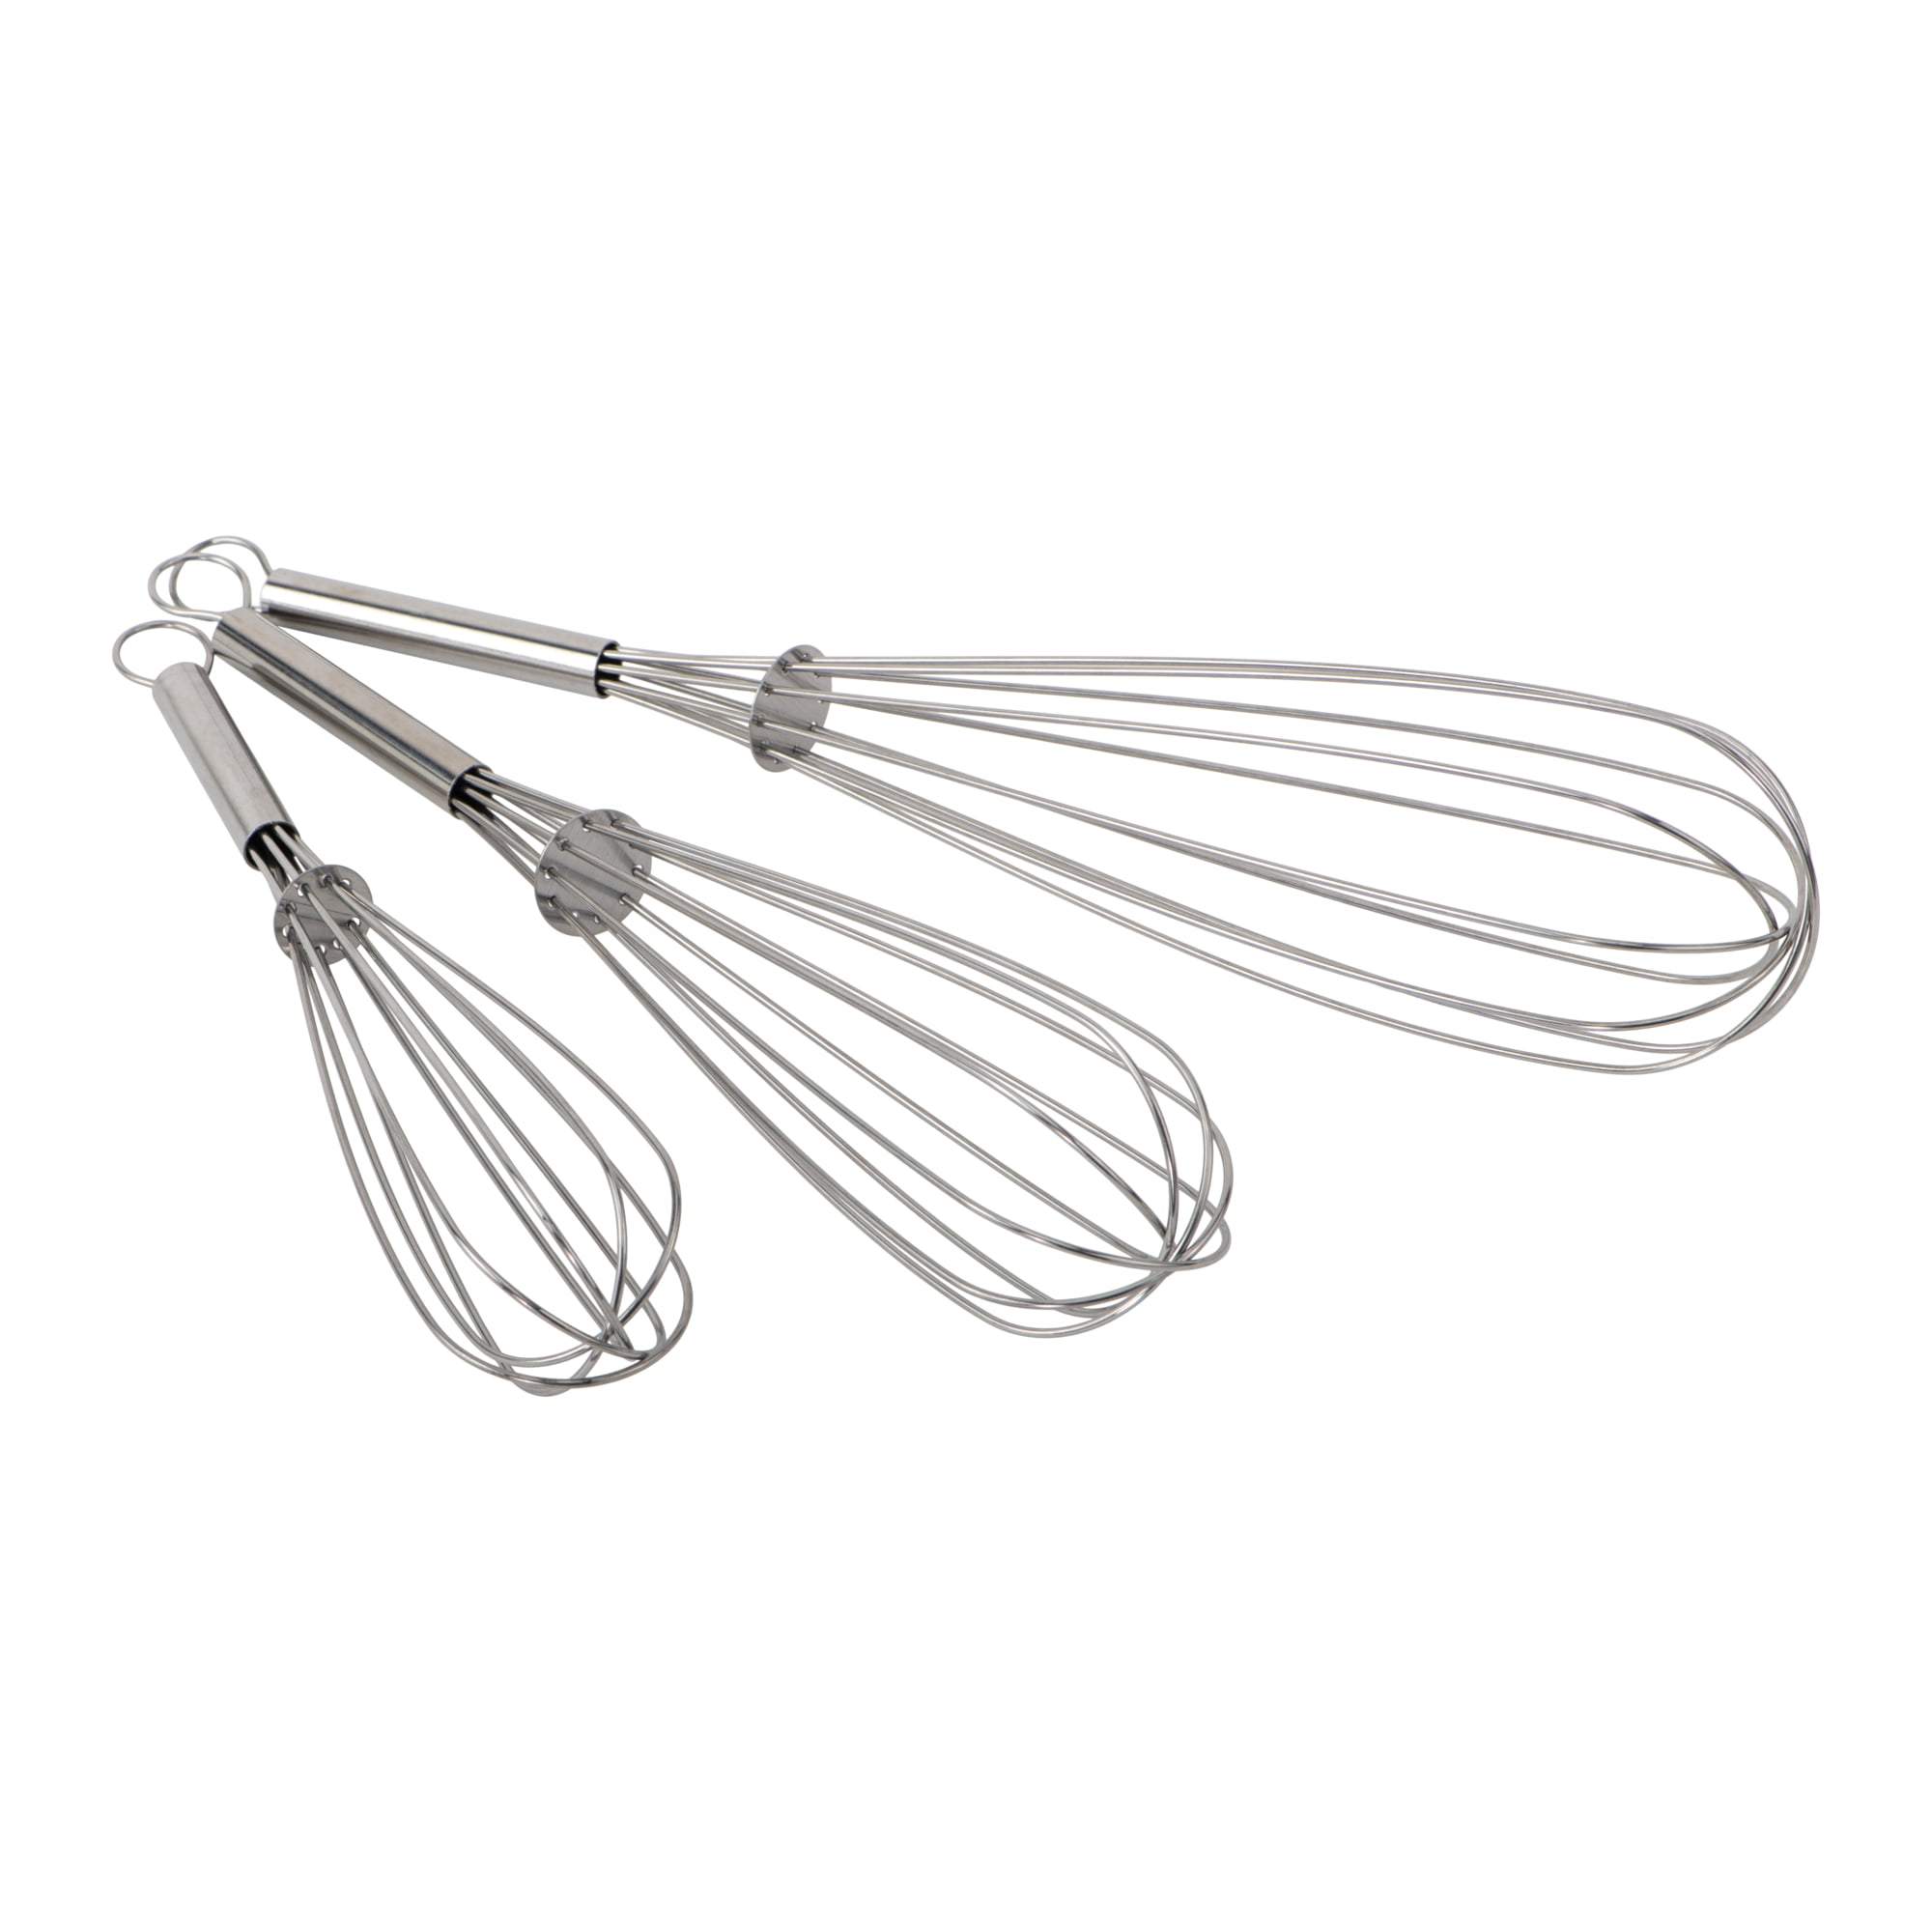 Basics Stainless Steel Wire Whisk Set - Manny's Choice Pure